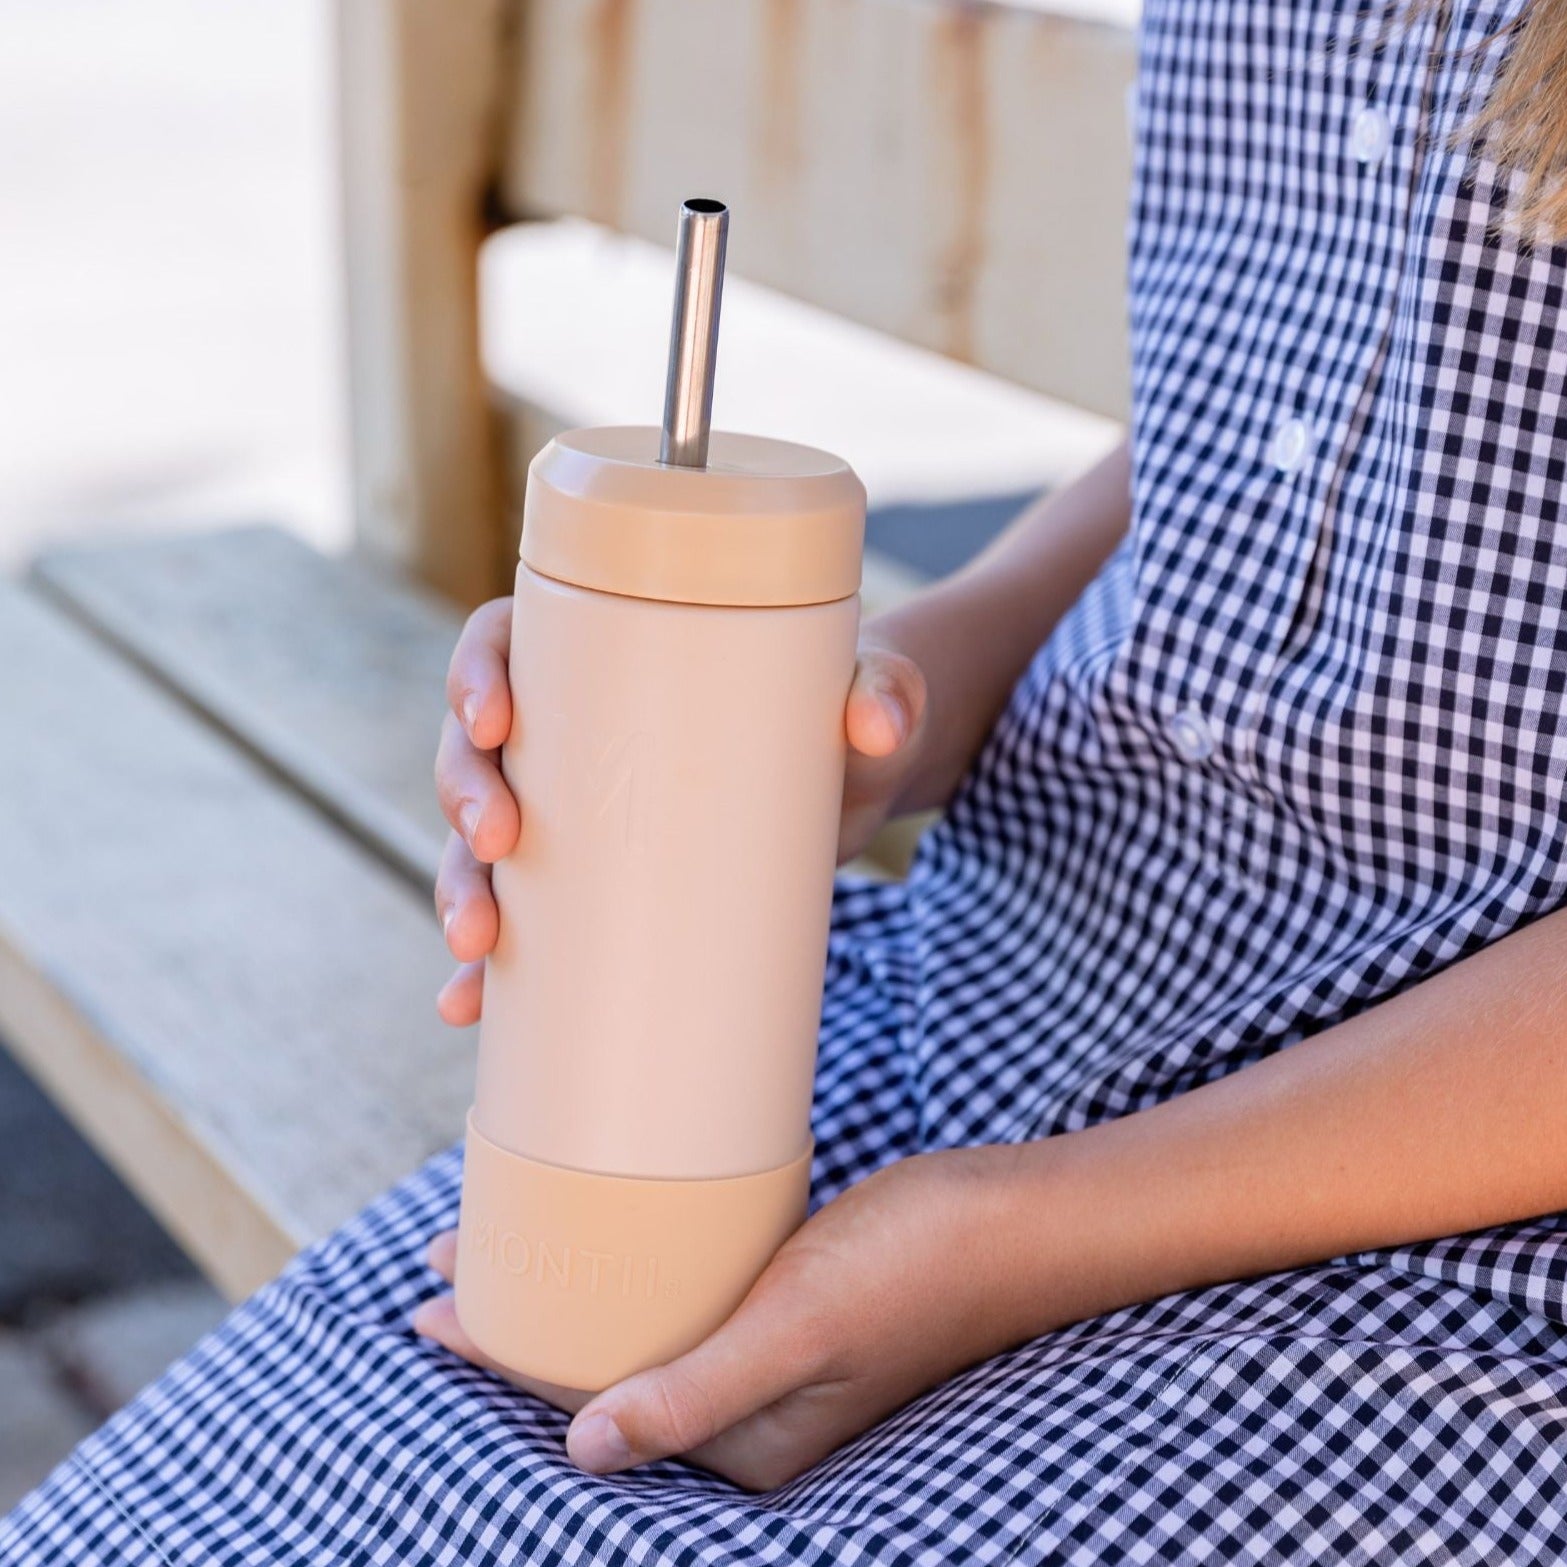 MontiiCo 475ml Smoothie Cup & Stainless Straw - Dune